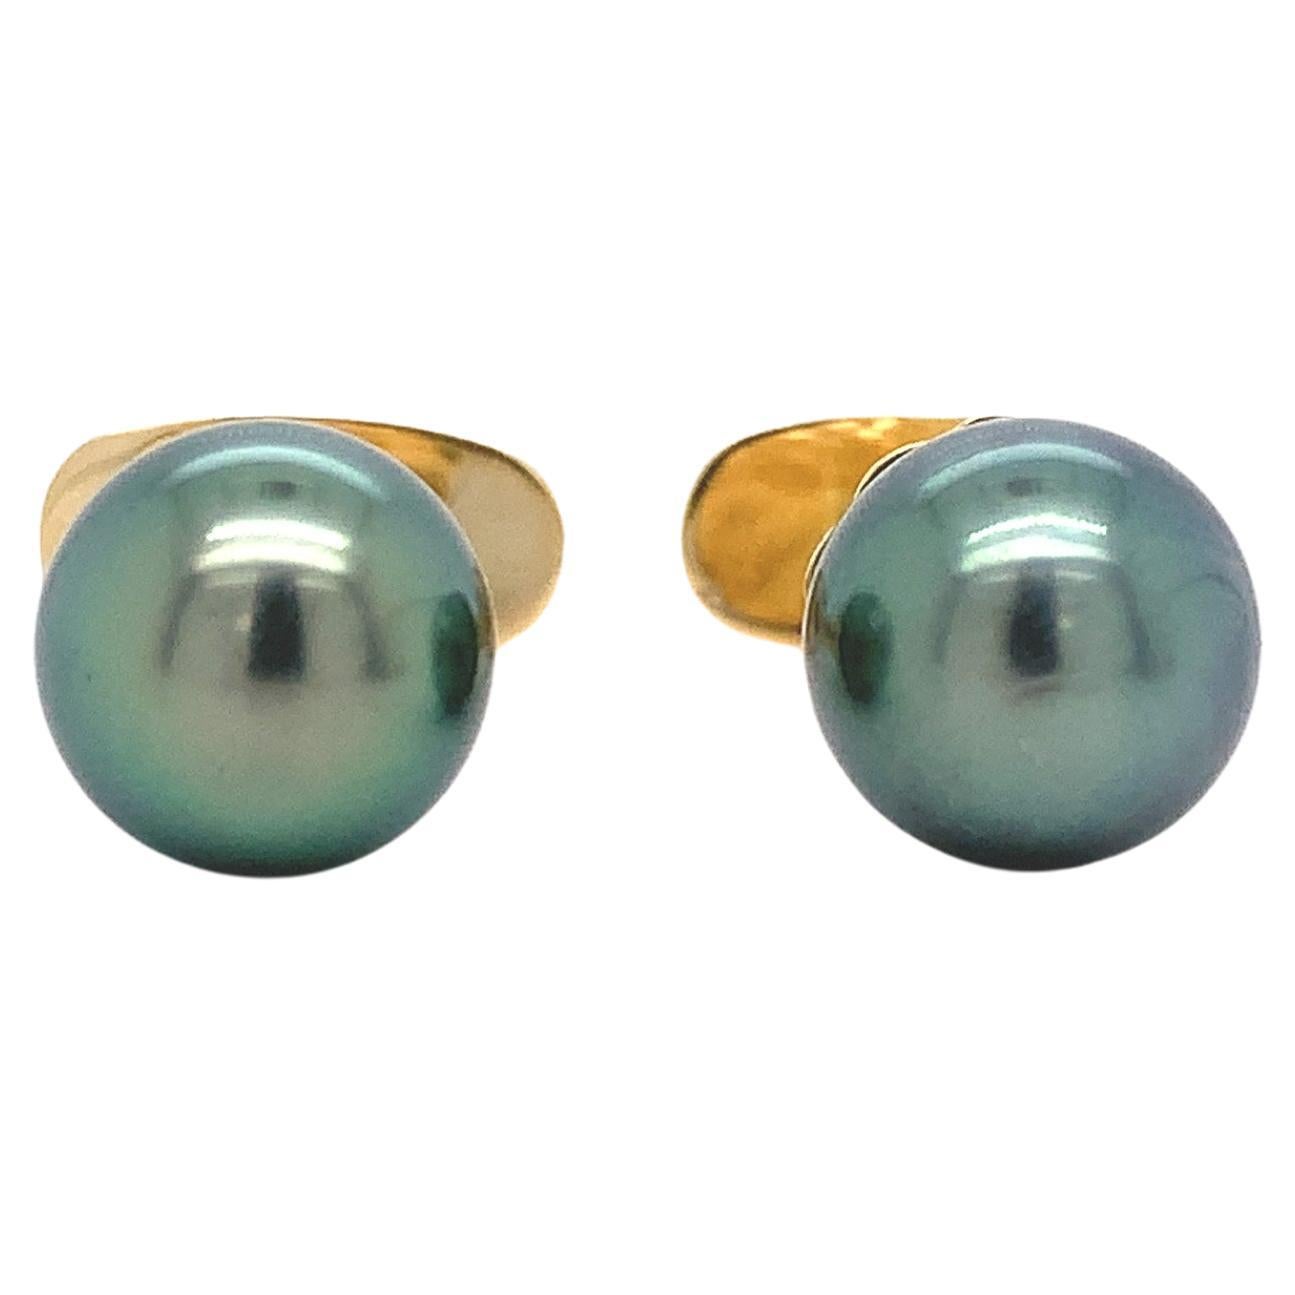 14K Yellow Gold Cufflinks with 9mm Tahitian Black Peacock Pearls